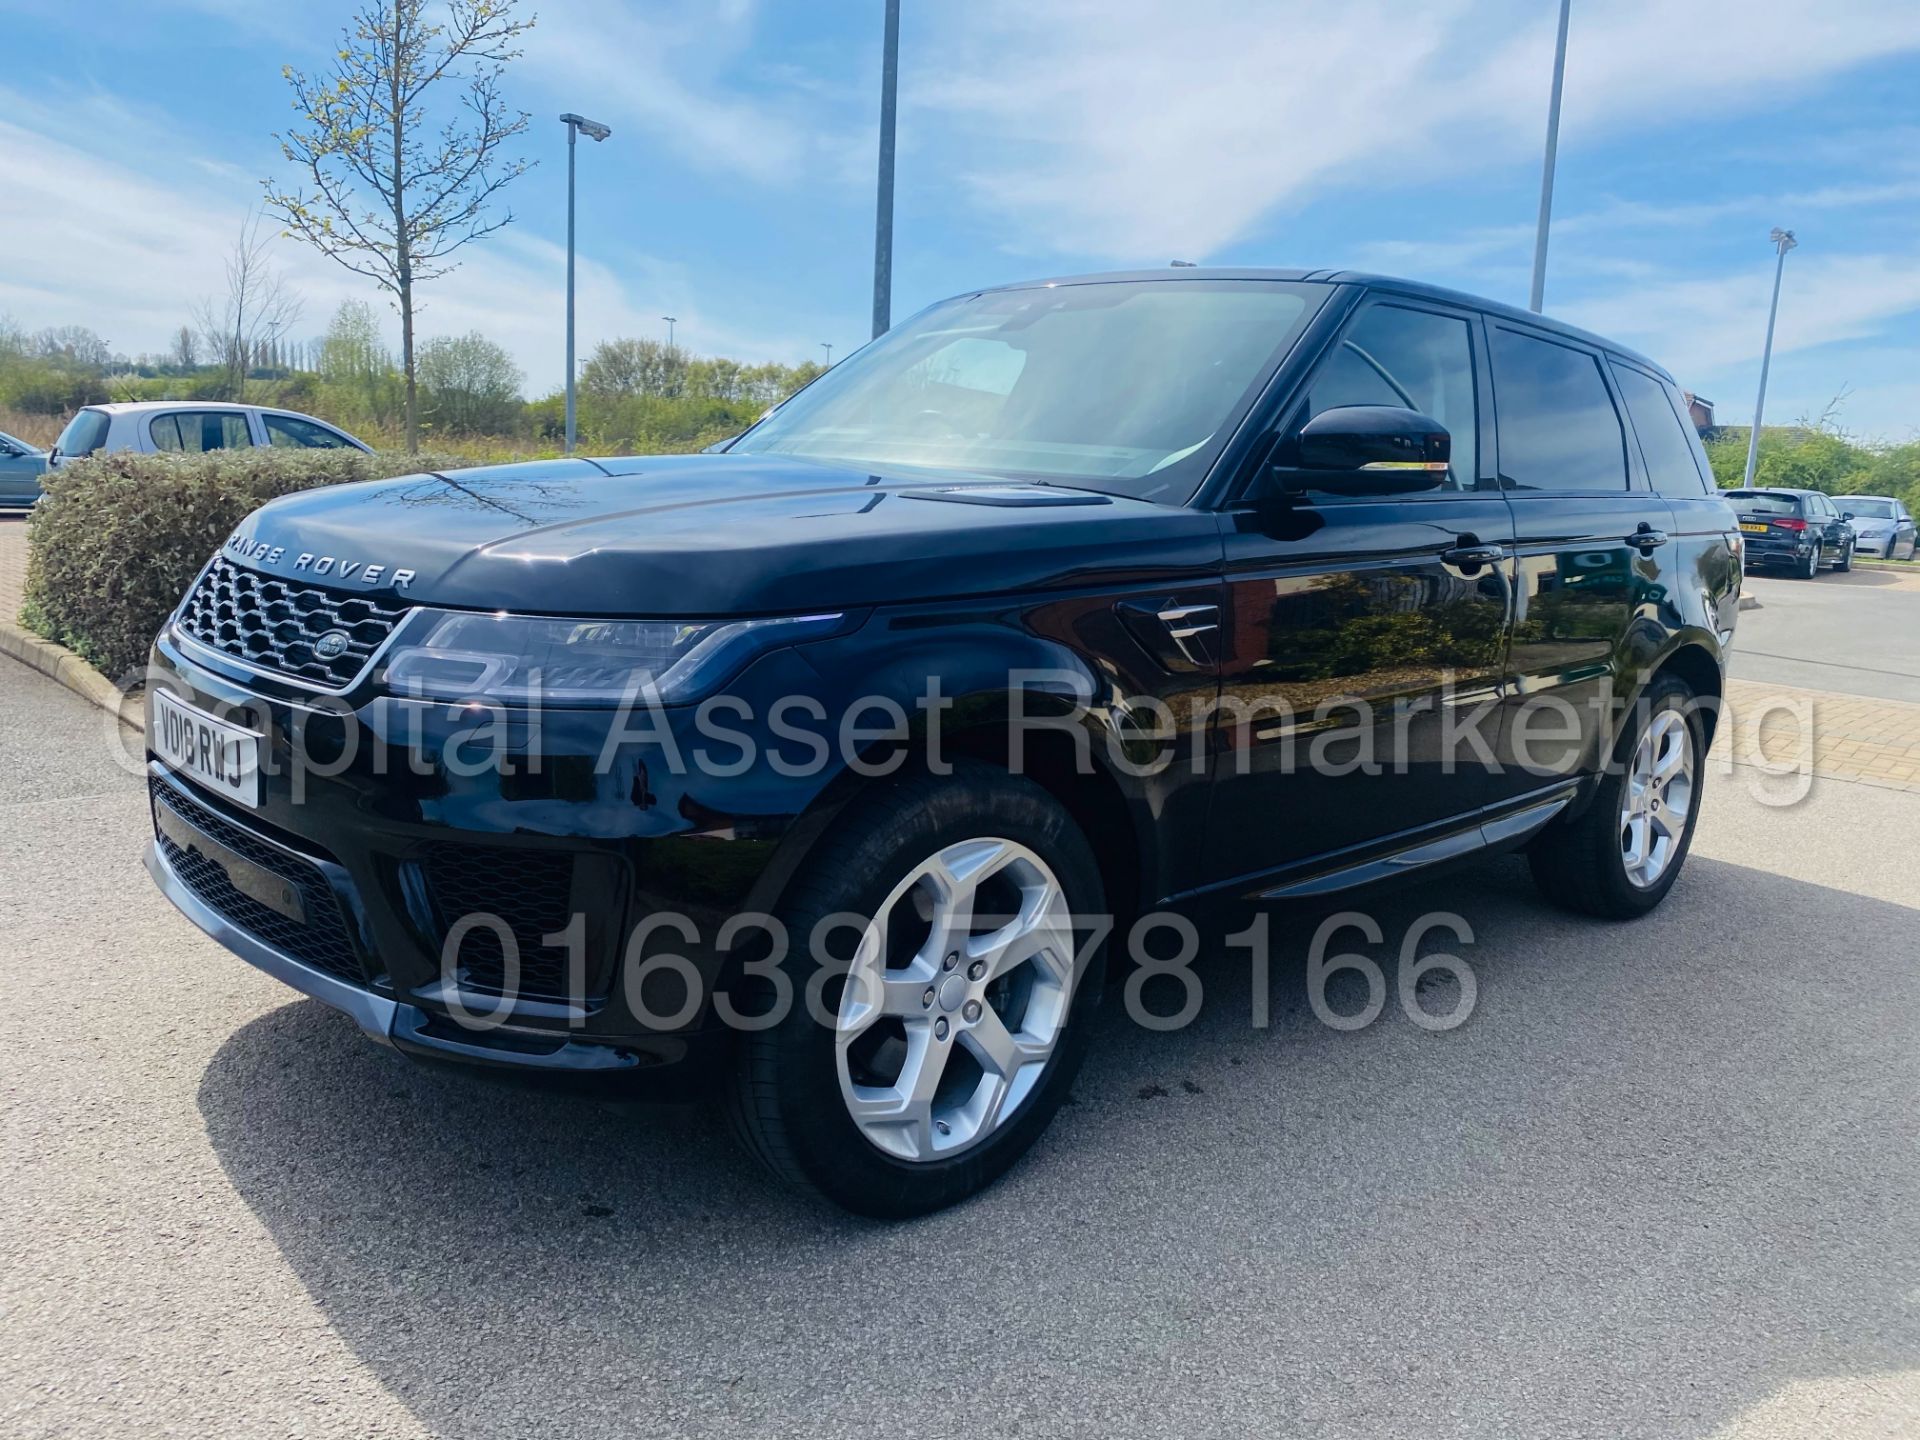 RANGE ROVER SPORT *HSE EDITION* SUV (2018 - NEW MODEL) '8 SPEED AUTO - LEATHER - NAV' *FULLY LOADED*